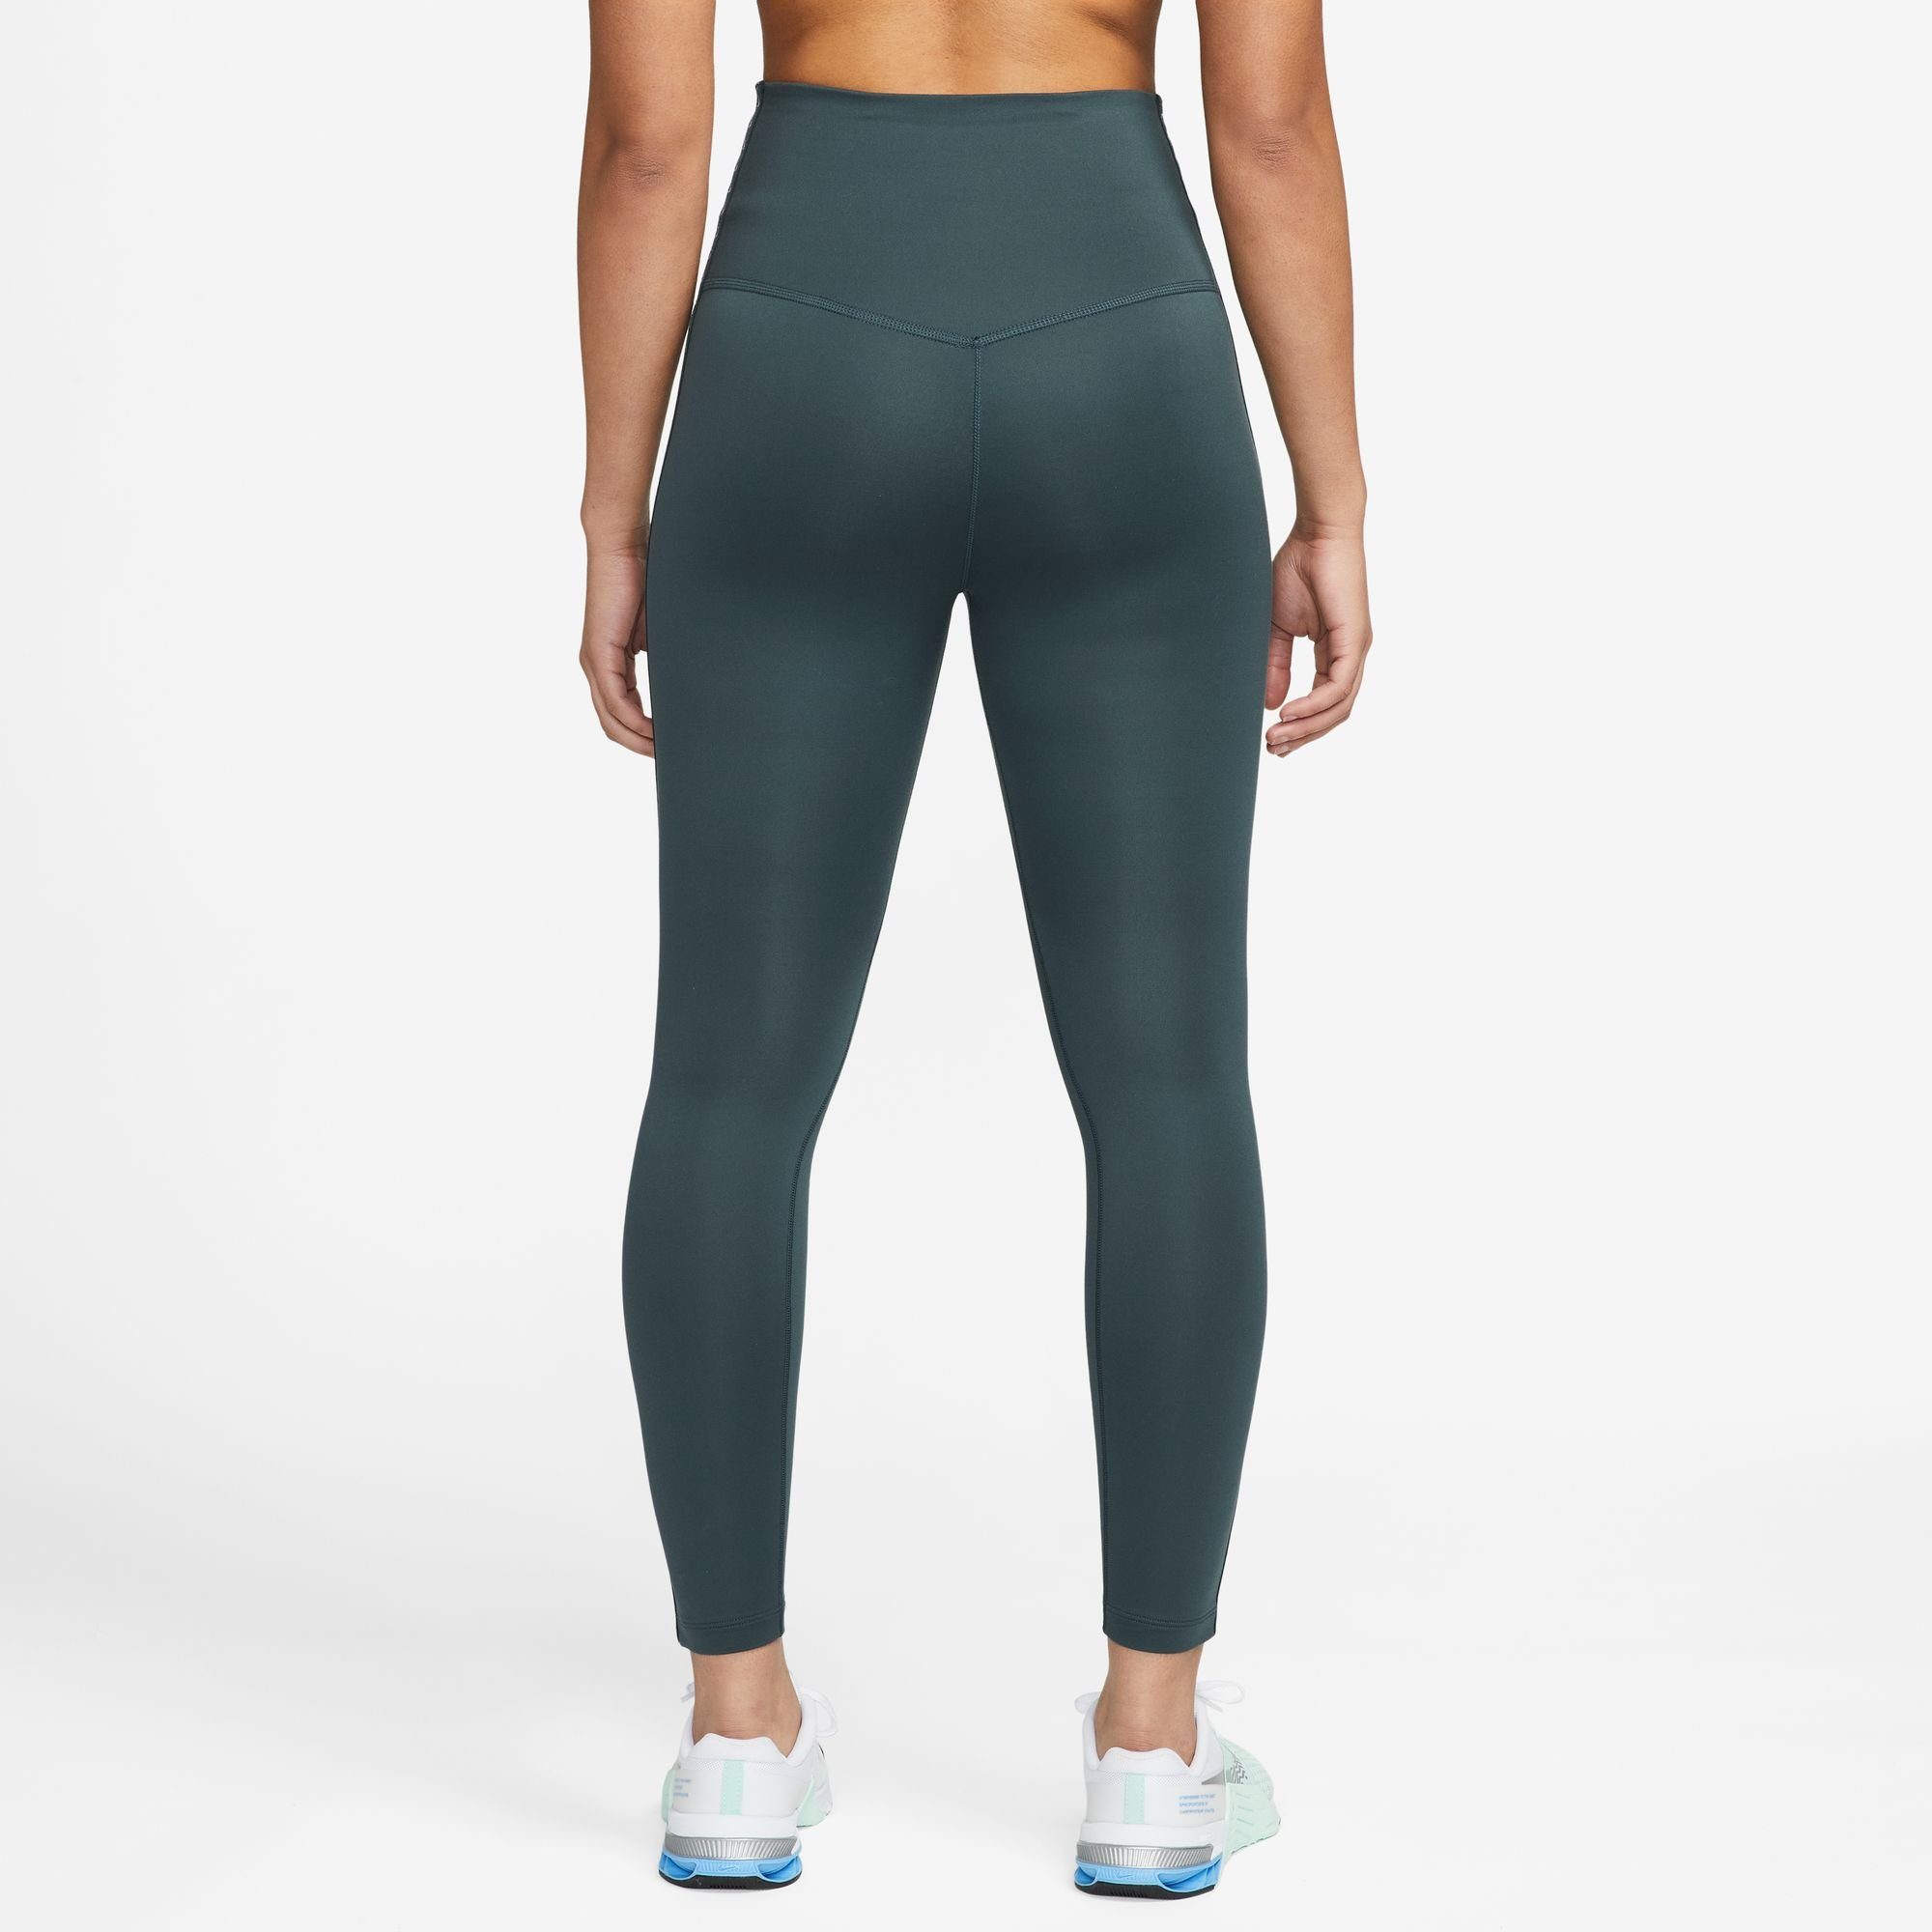 DEEP LEGGINGS / Nike JUNGLE/WHITE ONE Trainingstights WOMEN'S THERMA-FIT HIGH-WAISTED